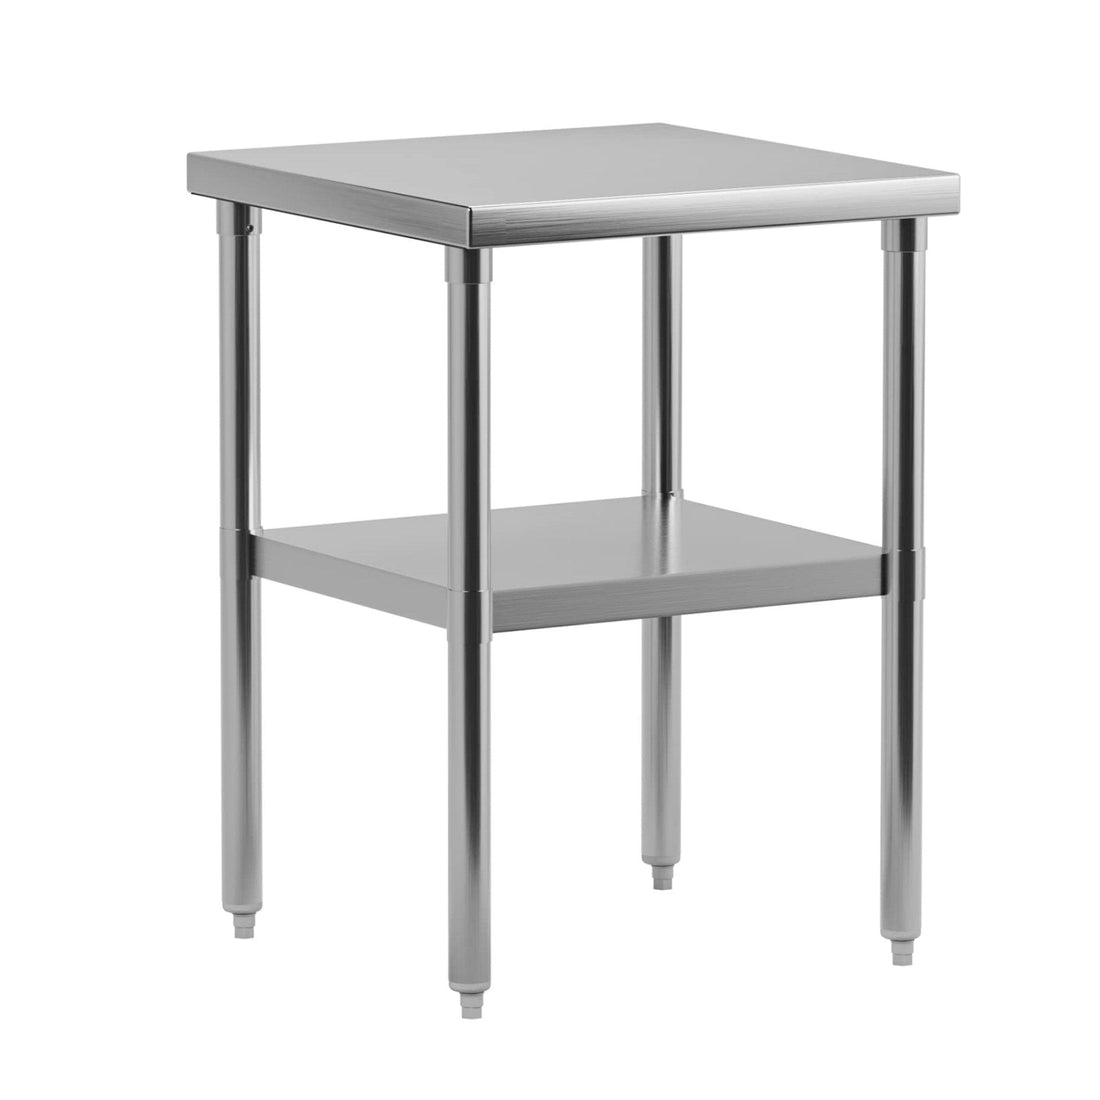 GARVEE 24" x 24" Stainless Steel Work Table with Undershelf NSF Certified Heavy Duty Commercial Kitchen Prep Table for Home Restaurant Hotel